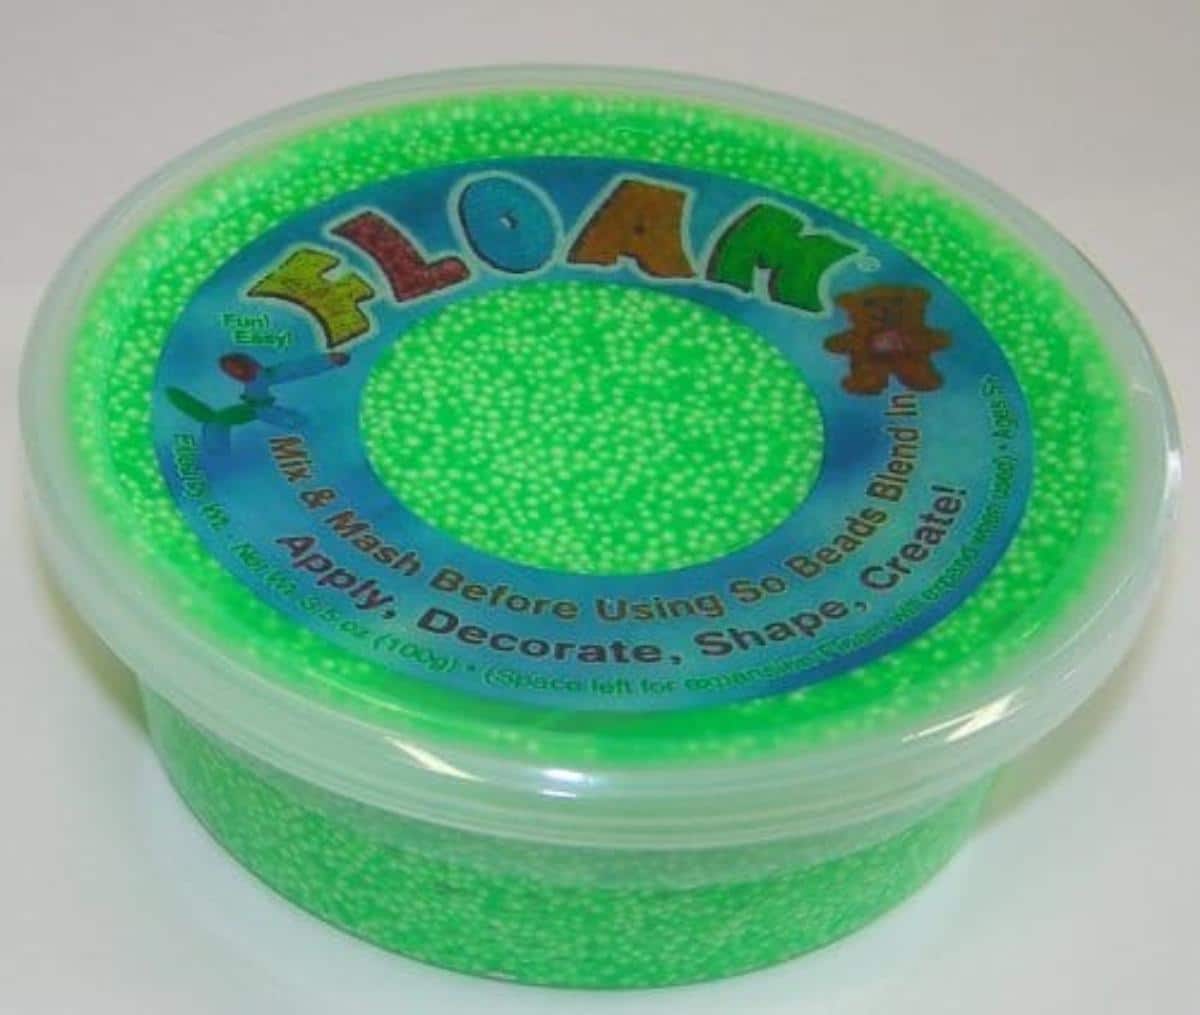 A floam package.